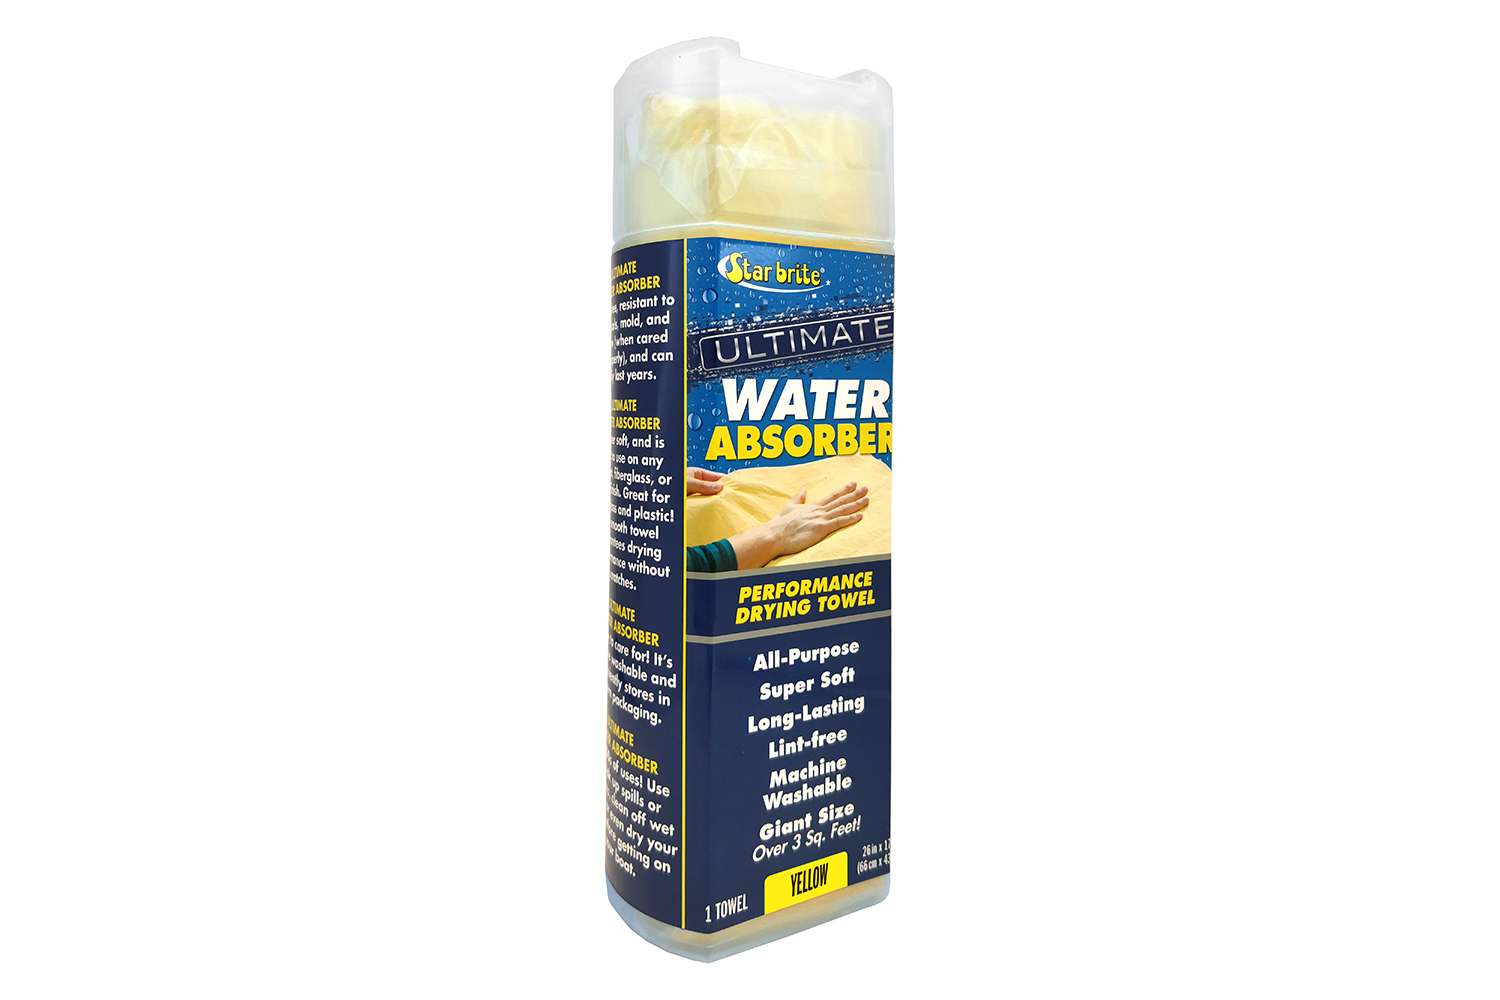 <p><b>Star brite Ultimate Water Absorber - 40046</b></p>
<p>Ultimate drying power for all surfaces, Ultimate Water Absorber is unaffected by salt water and most chemicals. Lint-free and super soft, trust Ultimate Water Absorber to get the job done. The super-drying PVA material is lint-free, resistant to chemicals, mold, and mildew (when cared for properly), and can easily last years. Ultimate Water Absorber is super soft, and is safe to use on any gelcoat, fiberglass, or auto finish. Great for eisenglass and plastic! The smooth towel guarantees drying performance without scratches, and itâs easy to care for! Itâs machine washable and conveniently stores in its own packaging. Ultimate Water Absorber has 100s of uses! Use to soak up spills or splashes, clean off wet shoes, or even dry your dog before getting on your boat. Coming soon to retailers nationwide and online. </p>
<p><a href=